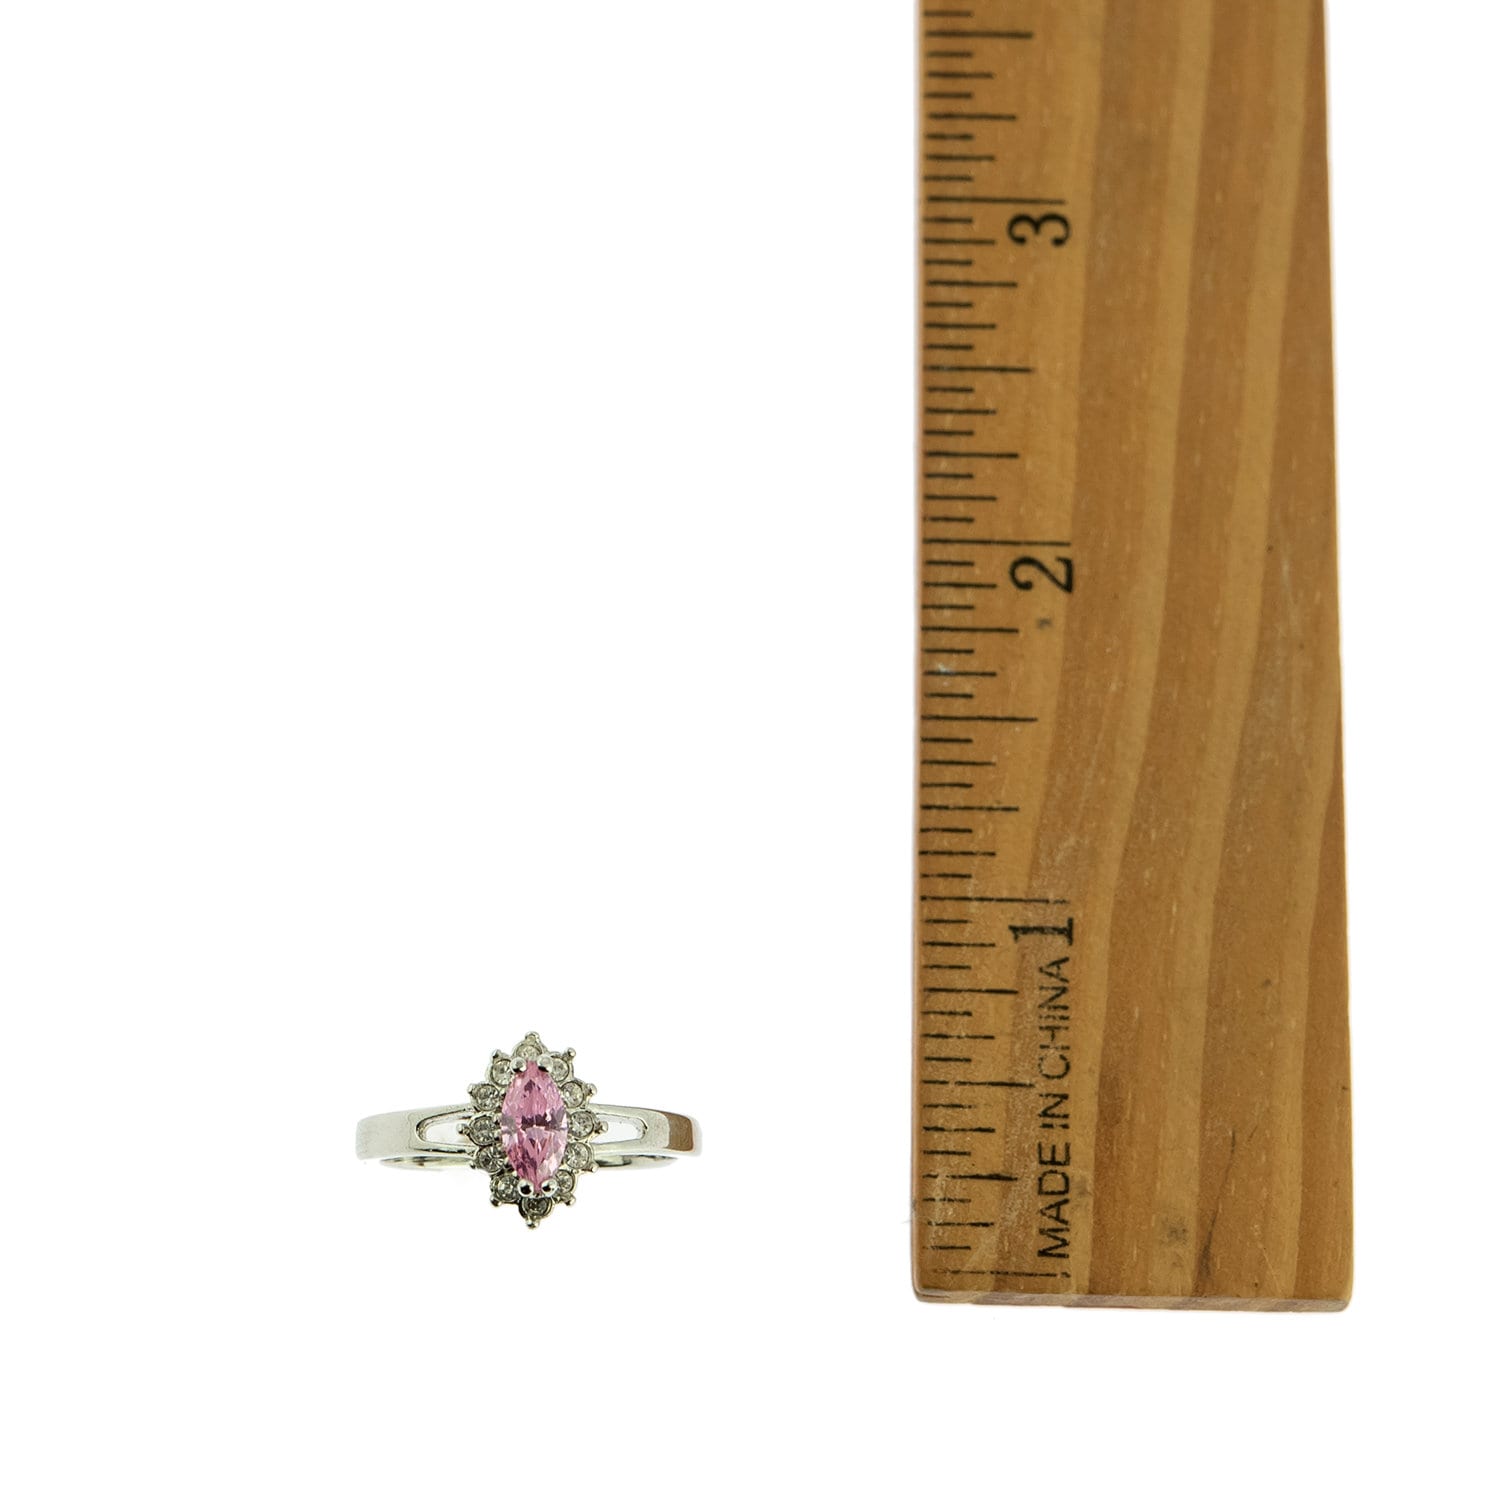 Vintage Ring Pink Tourmaline Cubic Zirconia and Clear Swarovski Crystals 18kt White Gold Silver  #R1314 - Limited Stock - Never Worn